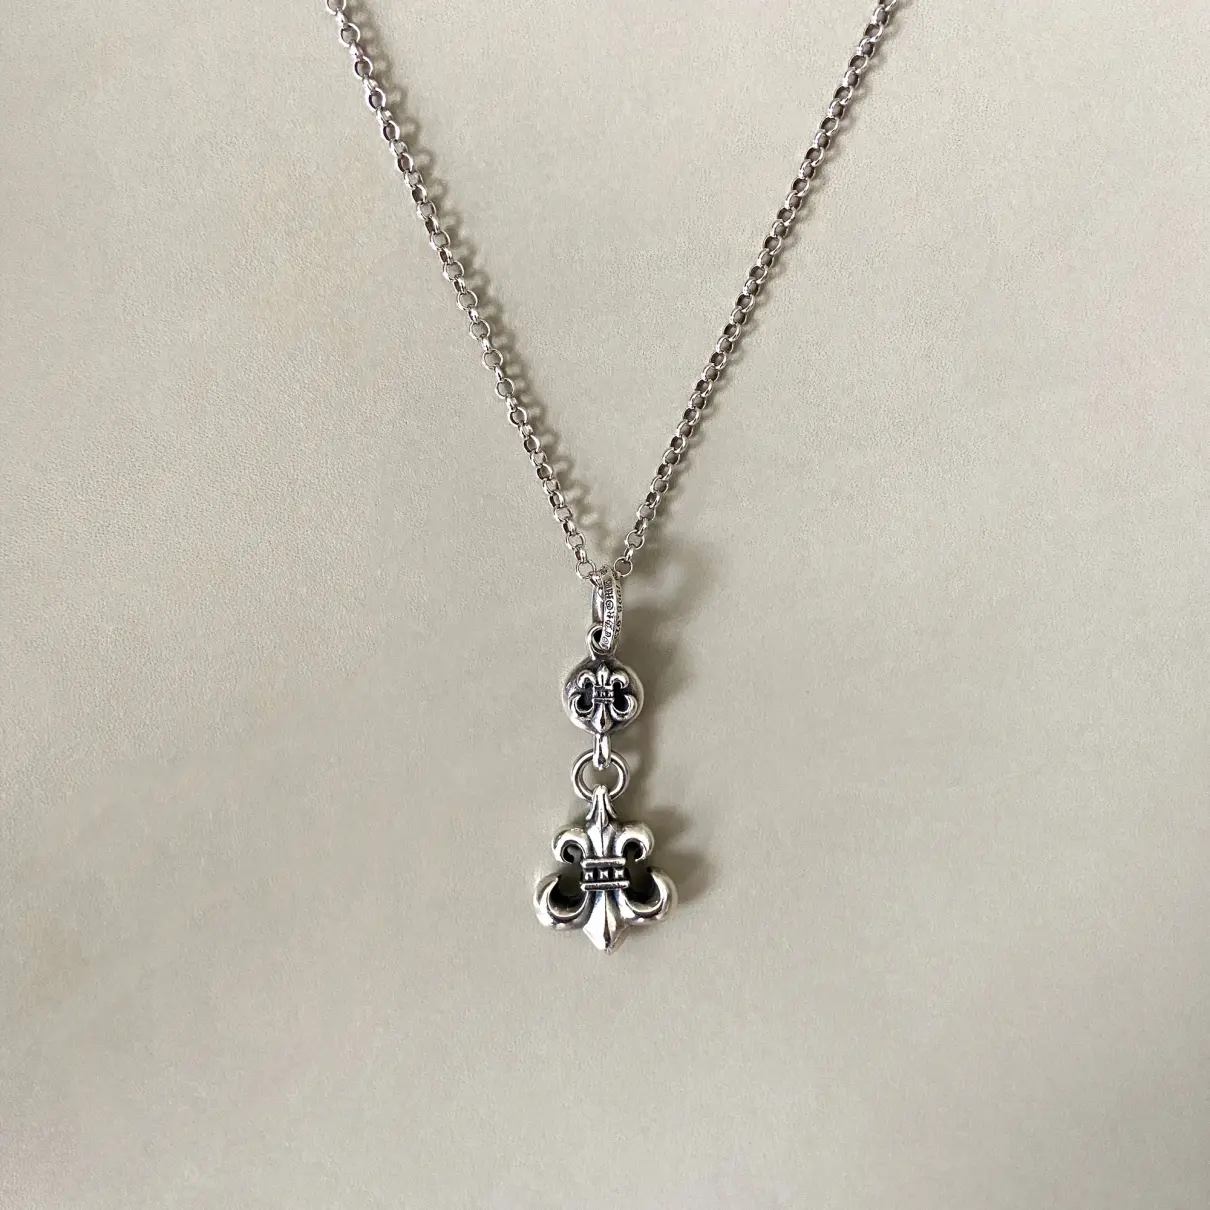 Buy Chrome Hearts Silver necklace online